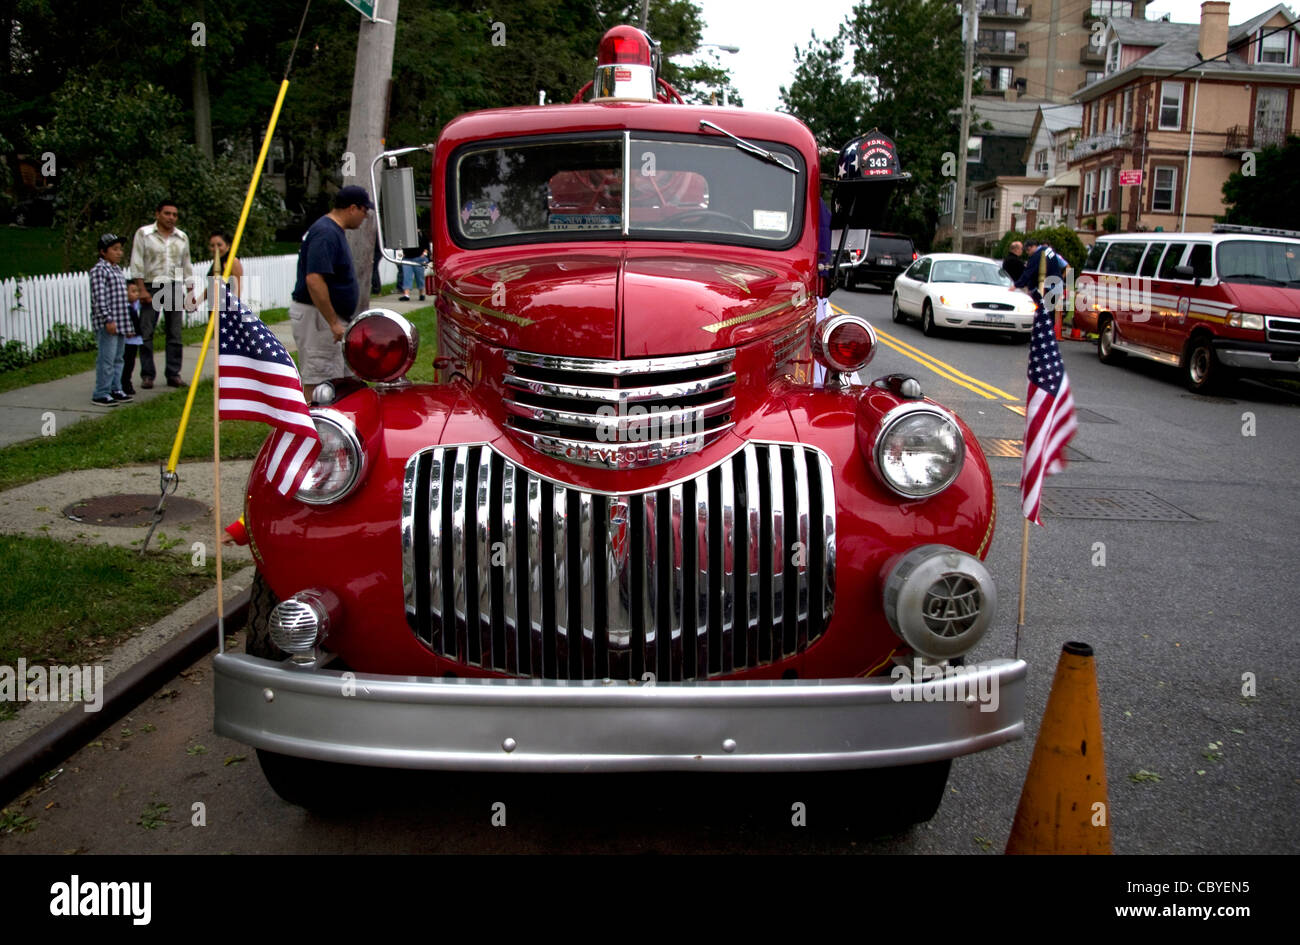 Antique American bright red 1940's Chevrolet fire truck on neighborhood display honoring those lost on 9/11 9-11. Stock Photo